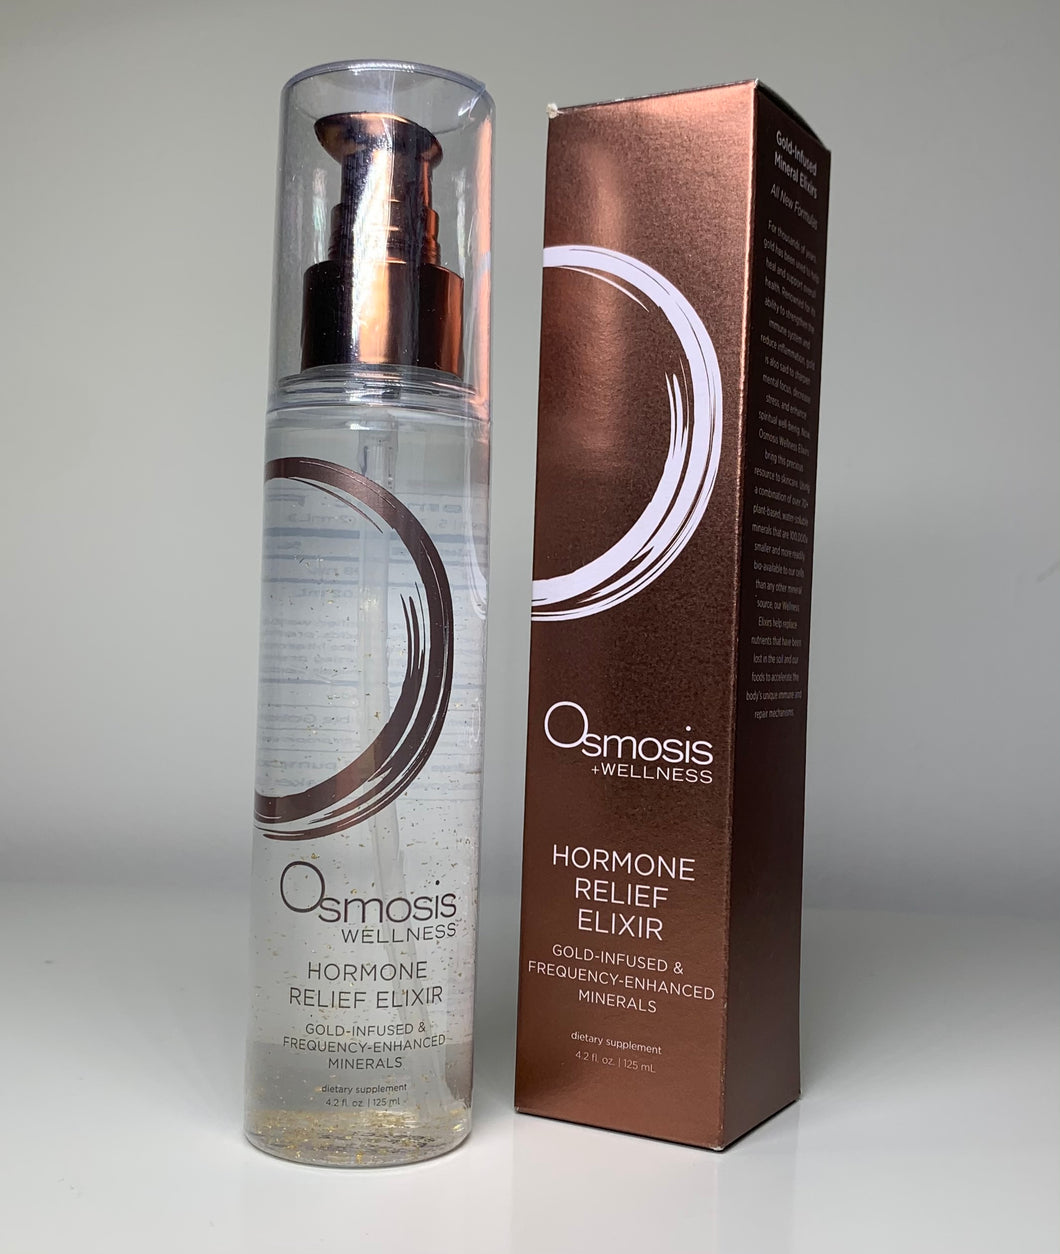 Osmosis Hormone Relief Elixir Gold Infused & Frequency Enhanced Minerals - European Beauty by B